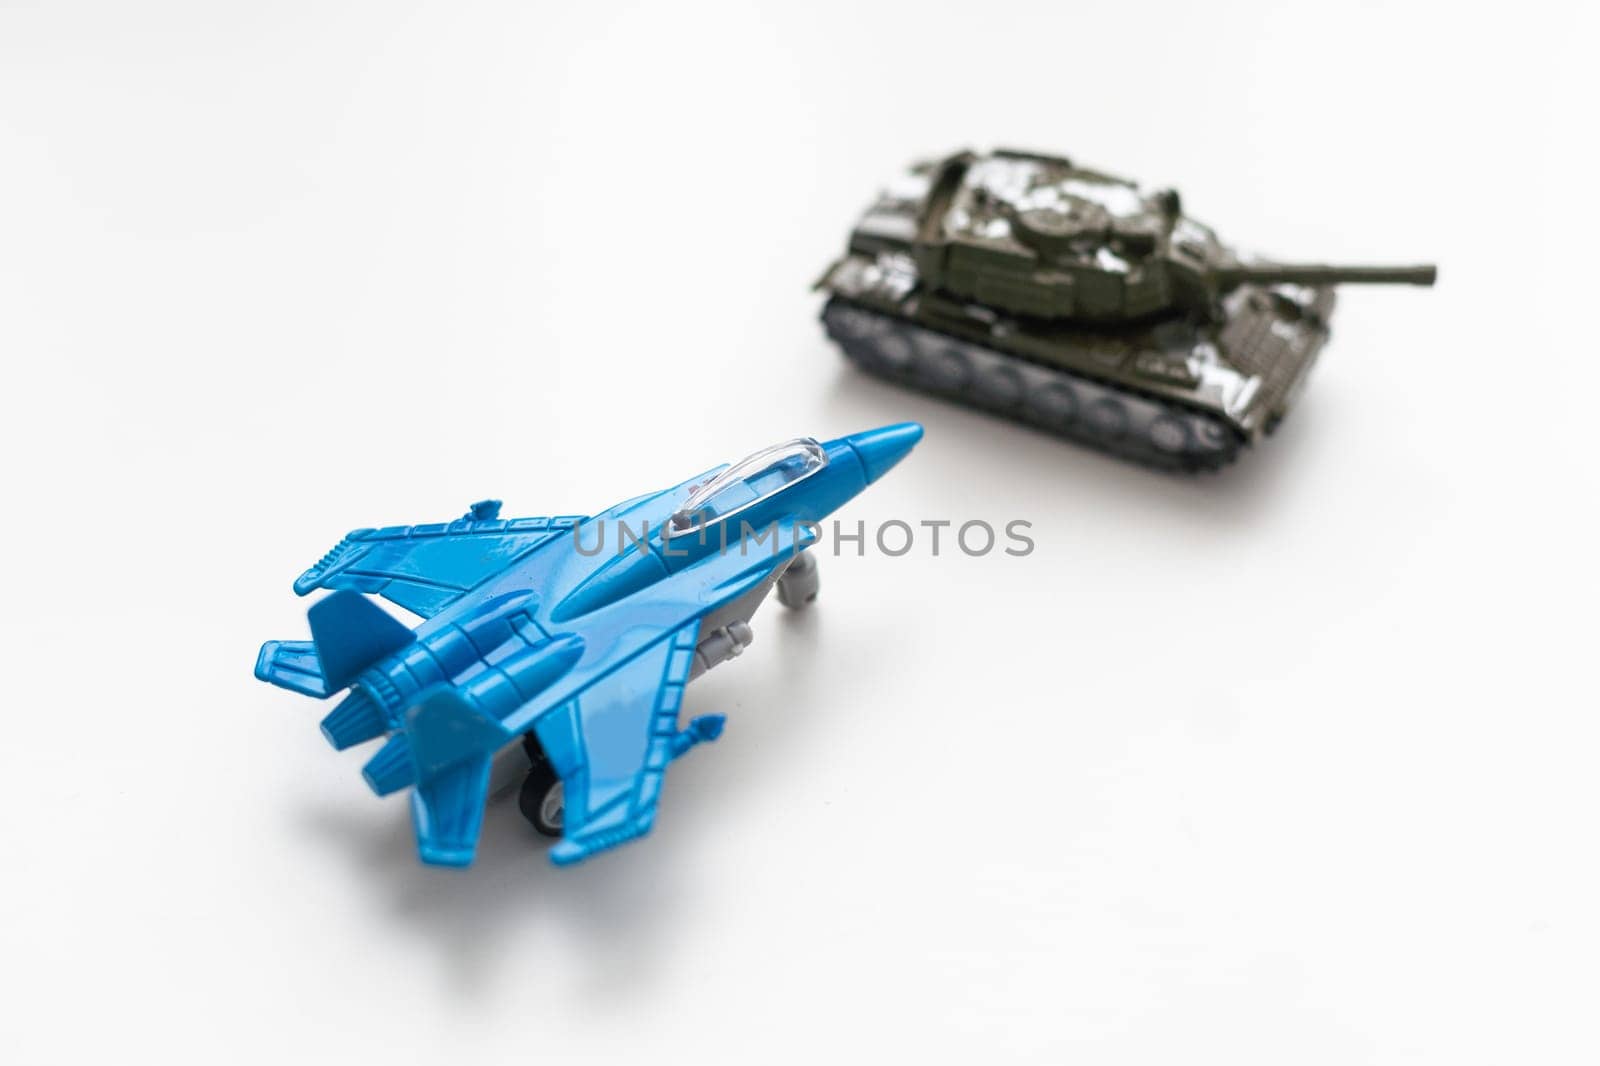 The image shows models of tanks and fighter jets on a white background, close up. by Andelov13